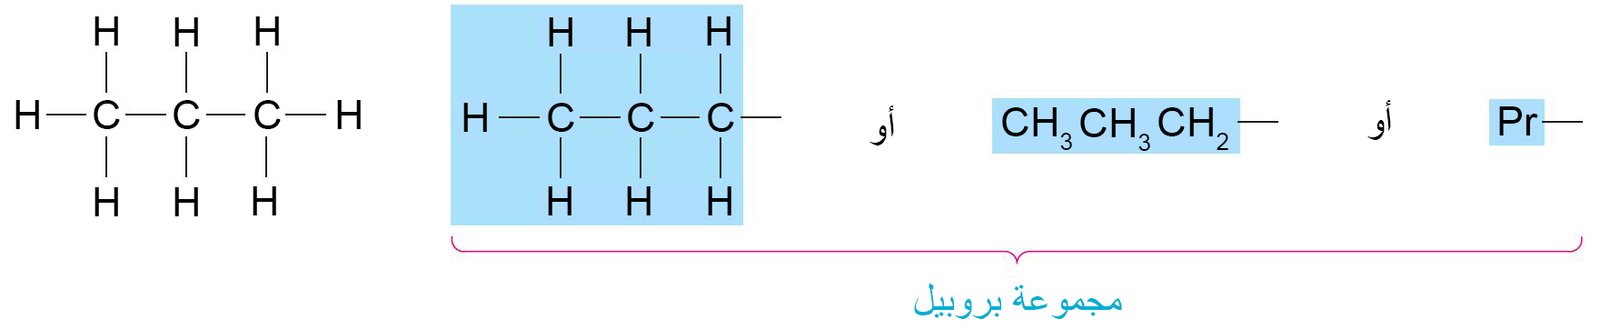 alkyl and halogen substituents 2a